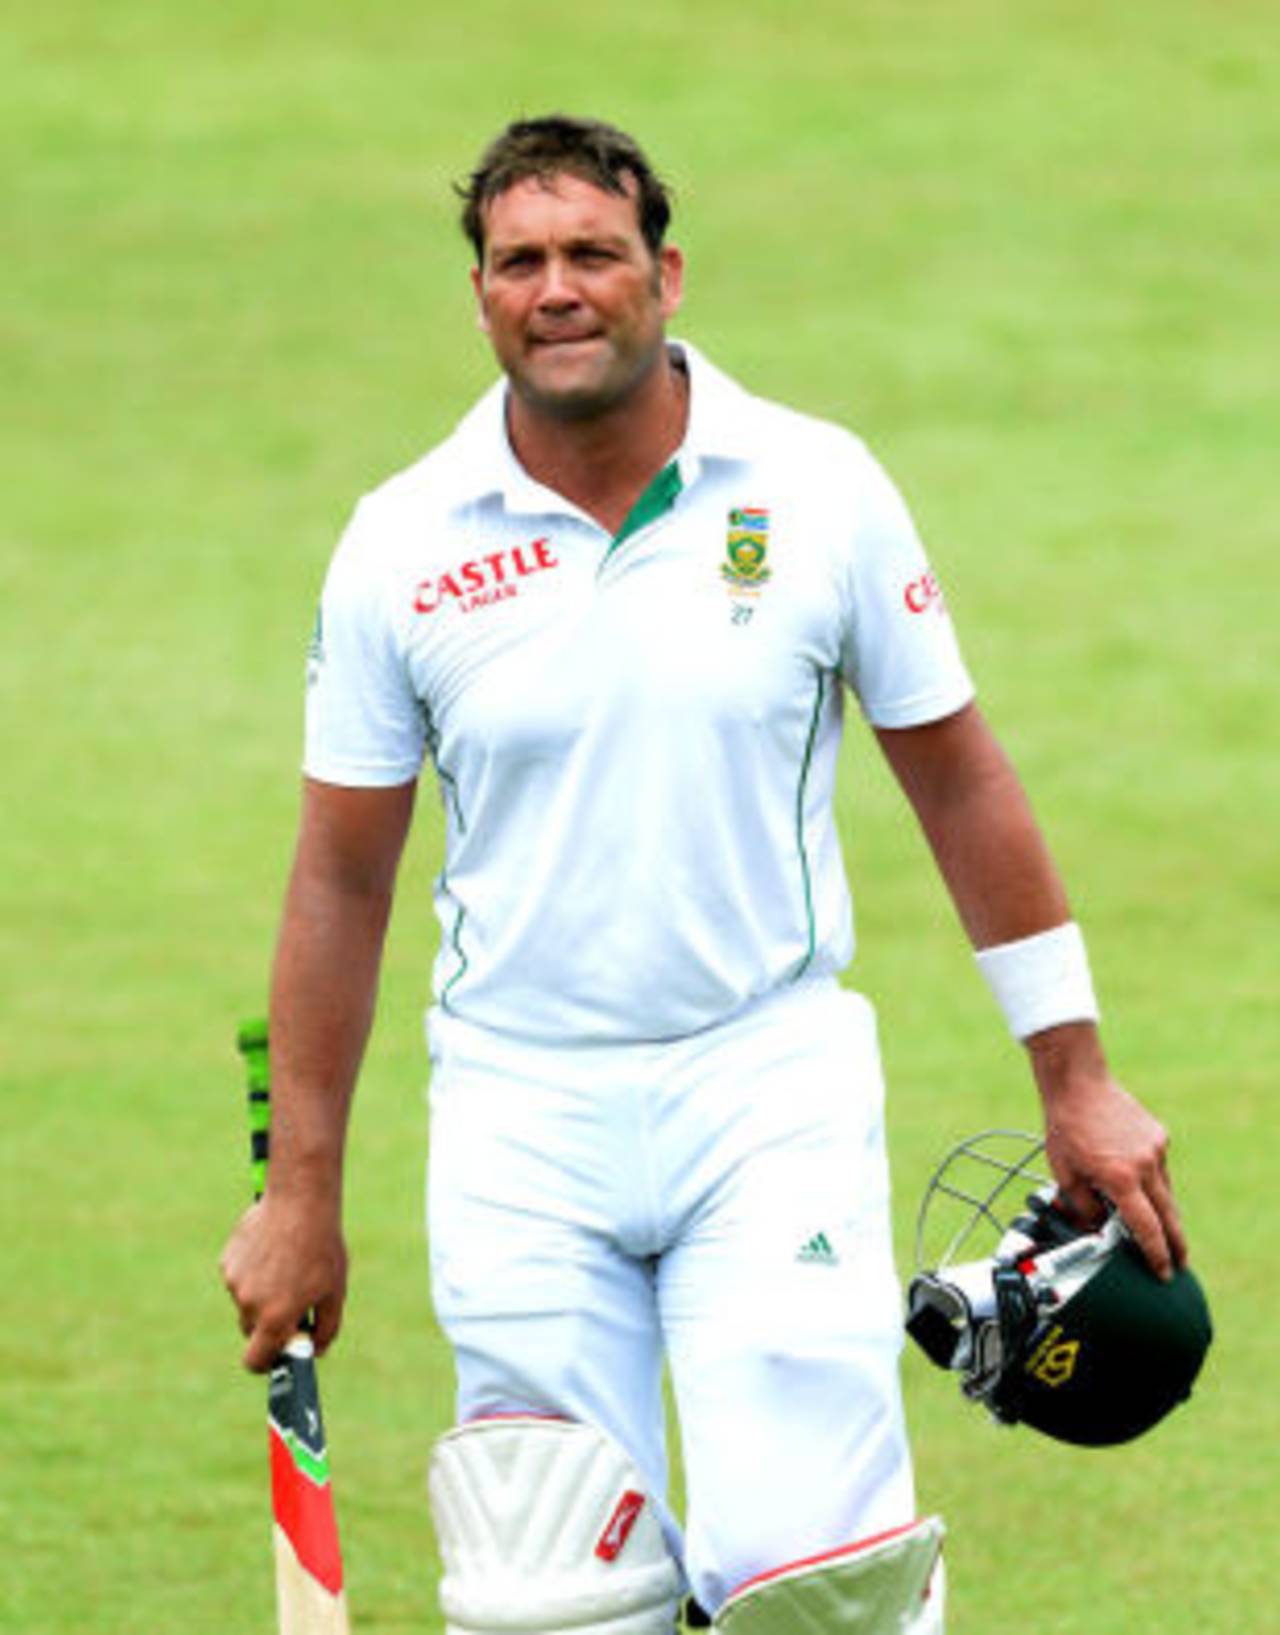 Jacques Kallis leaves the outfield in Durban with a century to his name in his final Test, against India, December 29, 2013